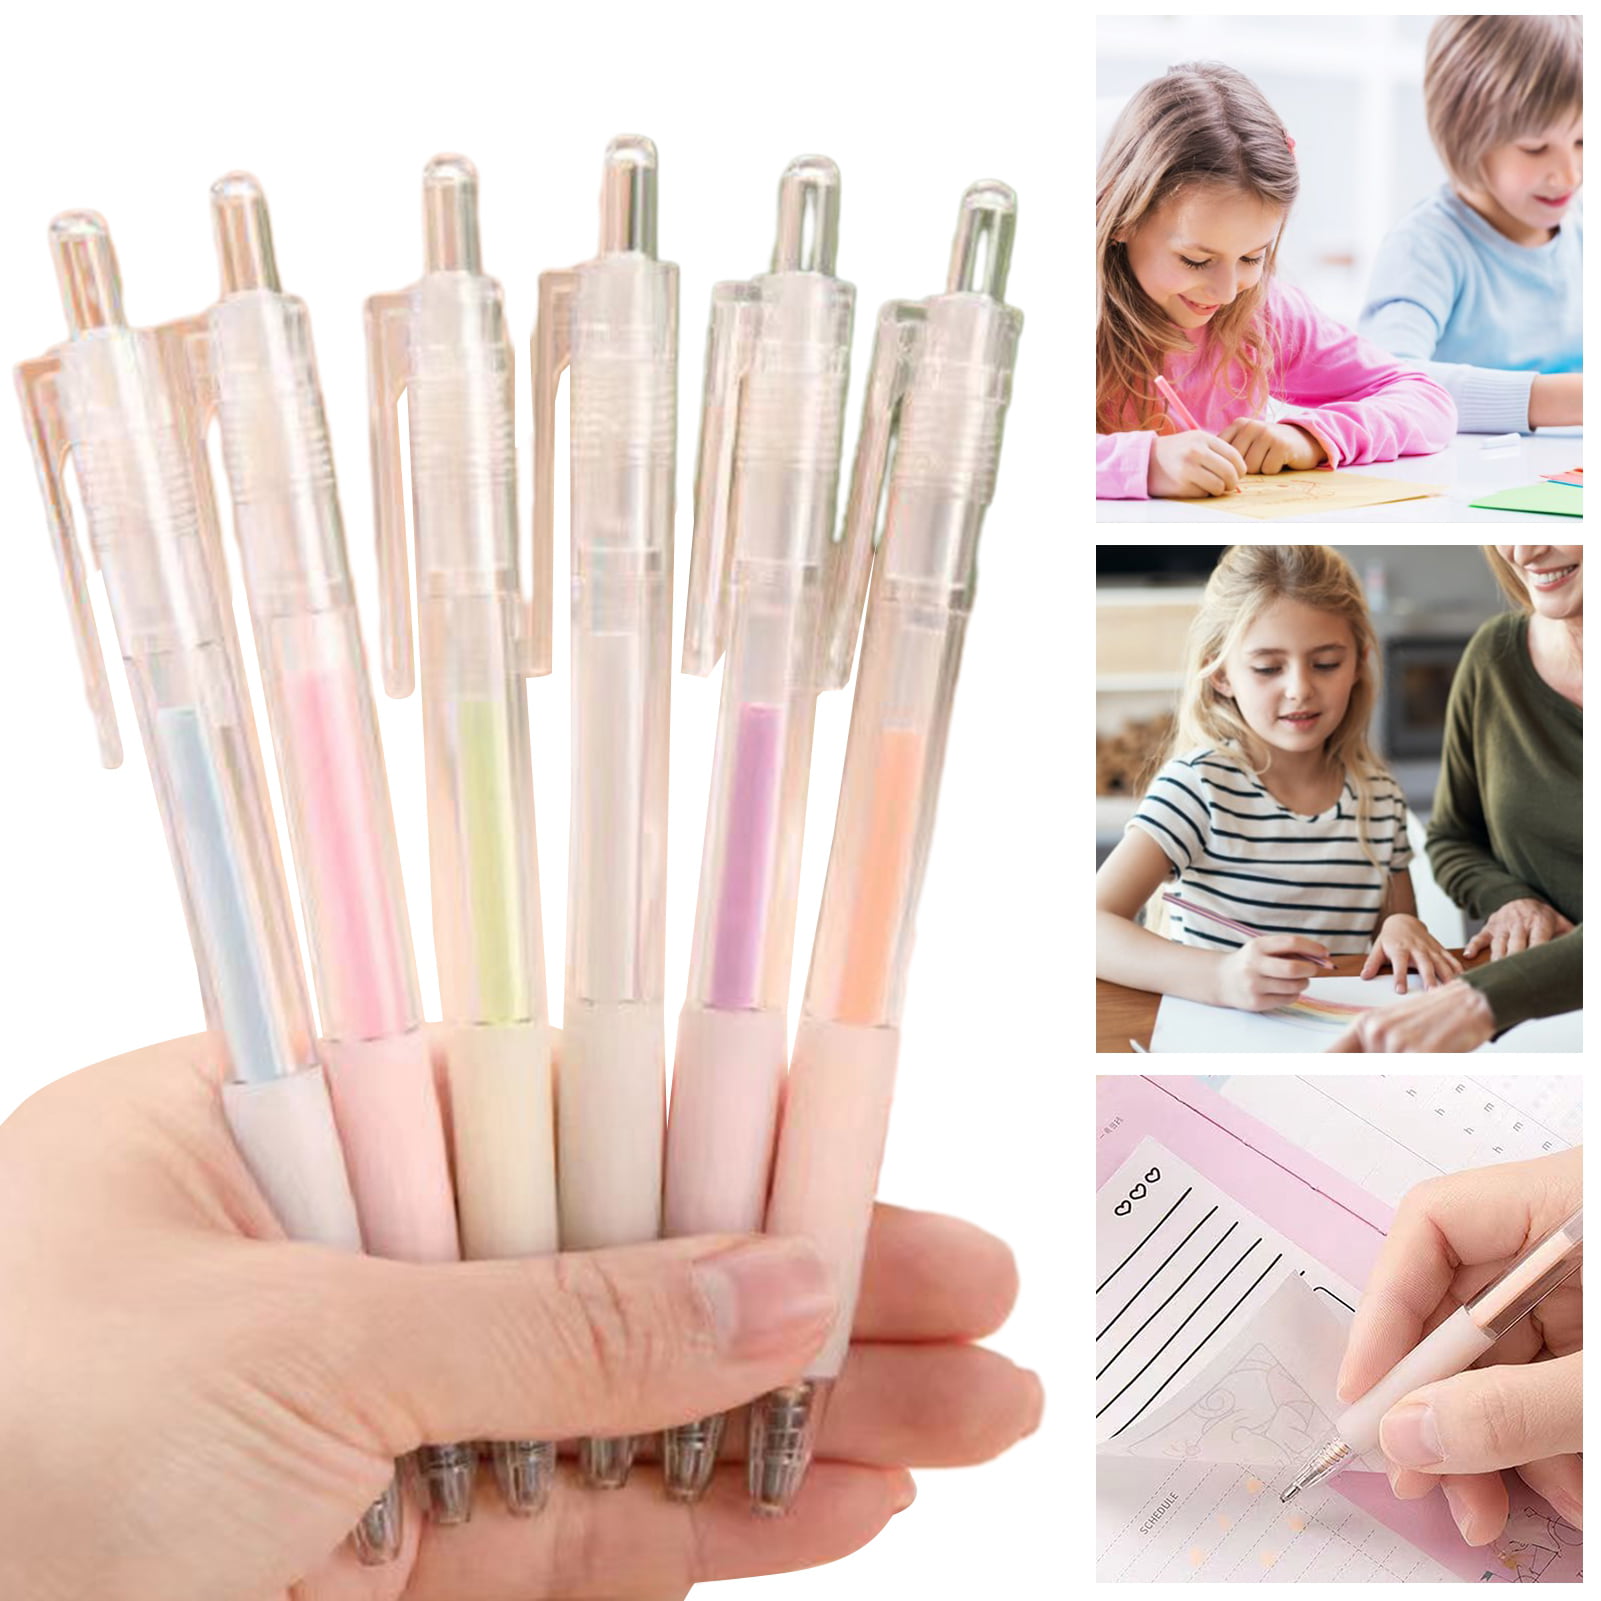 Walbest 6Pcs Glue Pen Fine Tip Quick Dry Double-sided Adhesive Precise  Control Scrapbooking Decor Dot Glue Pen Stick Stationery Supplies 